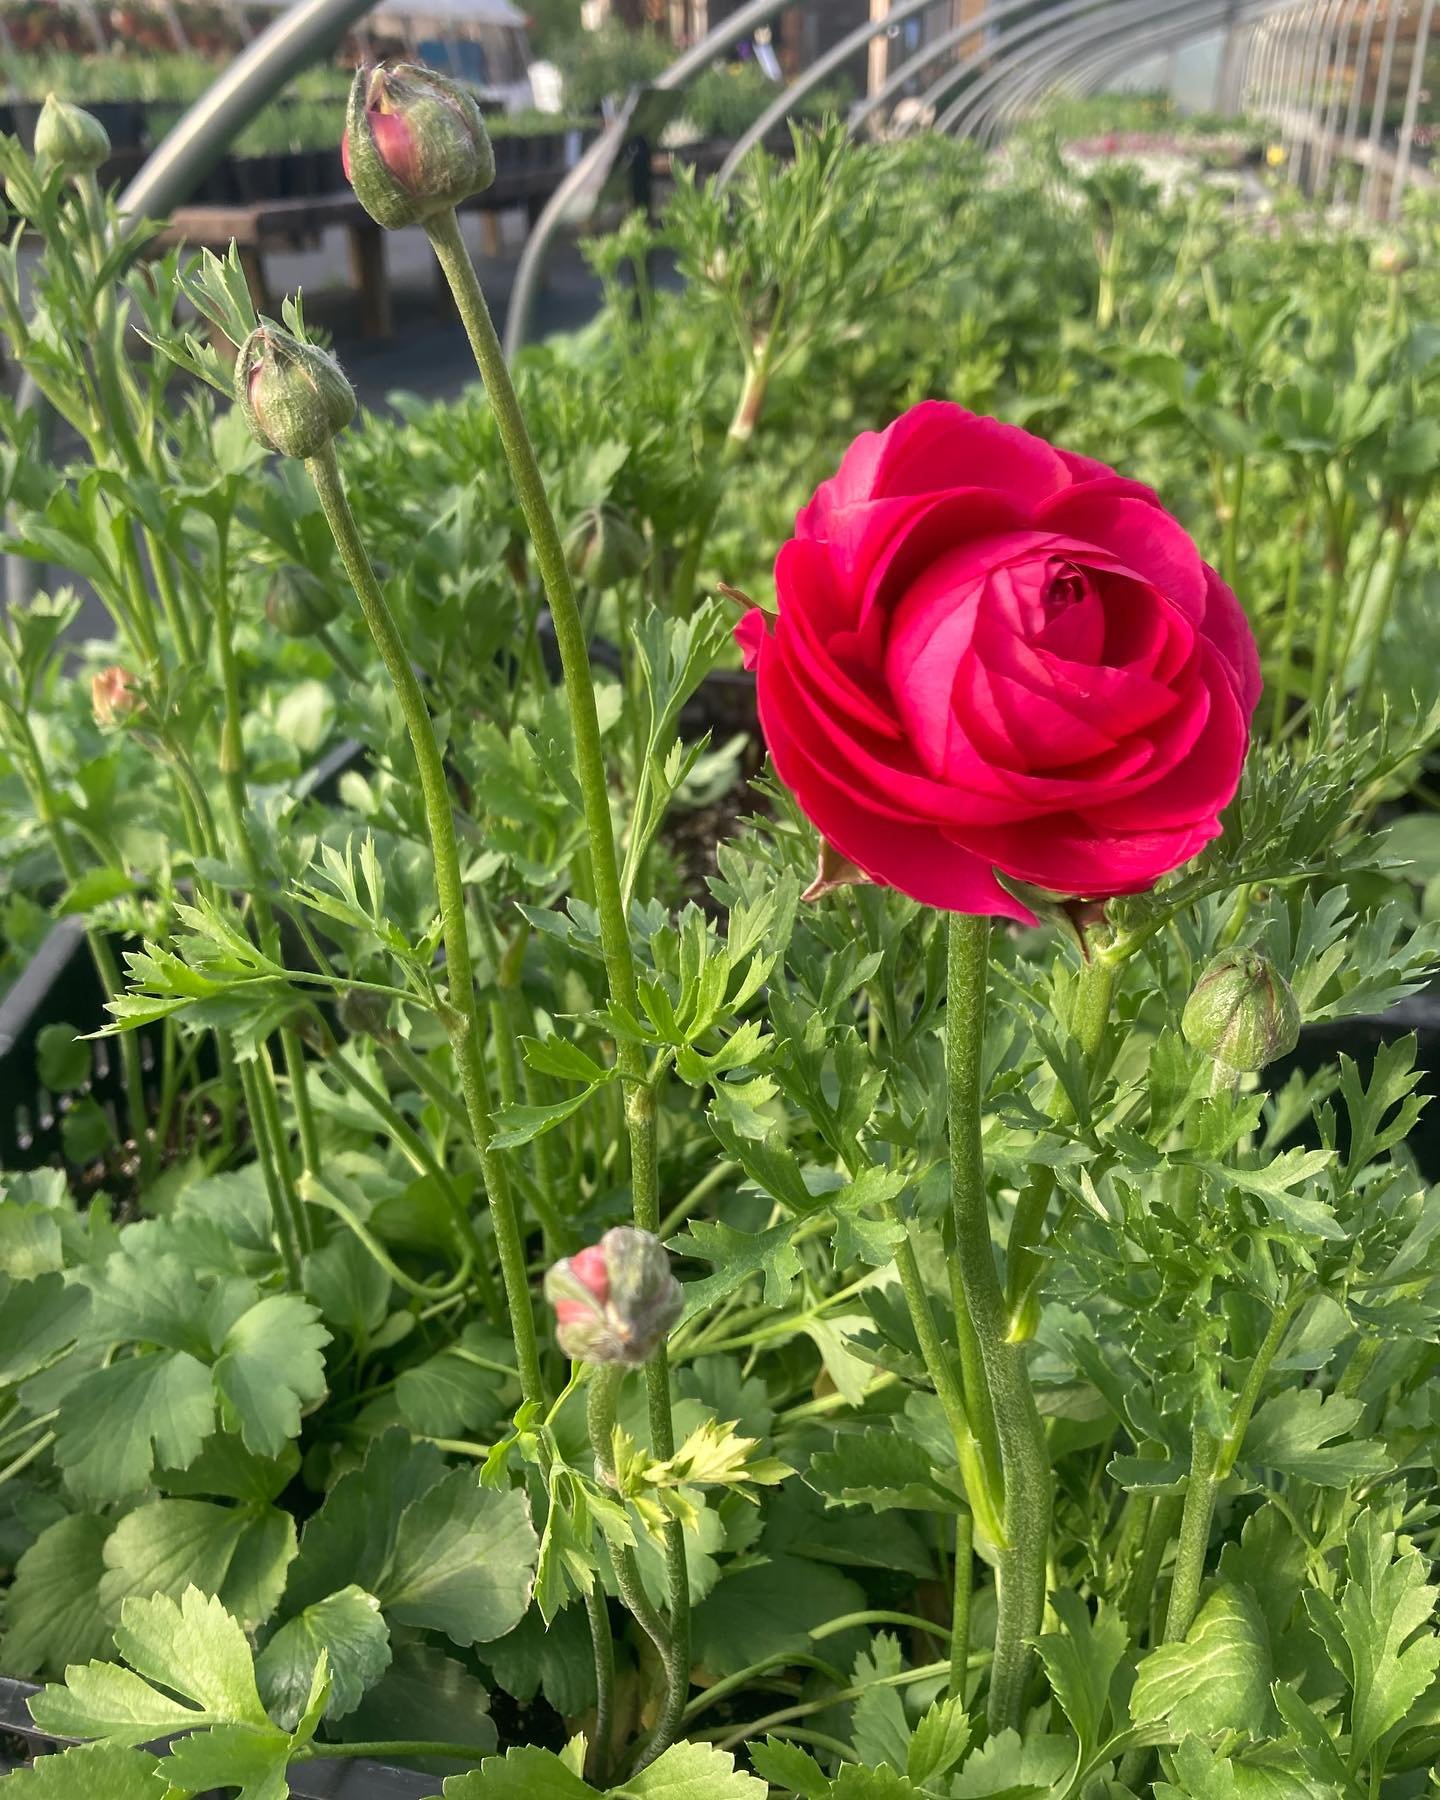 Our first ranunculus in bloom!! These babies were our big experiment this year with help from @flicker_hill_homestead and we are SO excited that they are full of buds. We grew these in crates in our perennial greenhouse and then they moved to the col